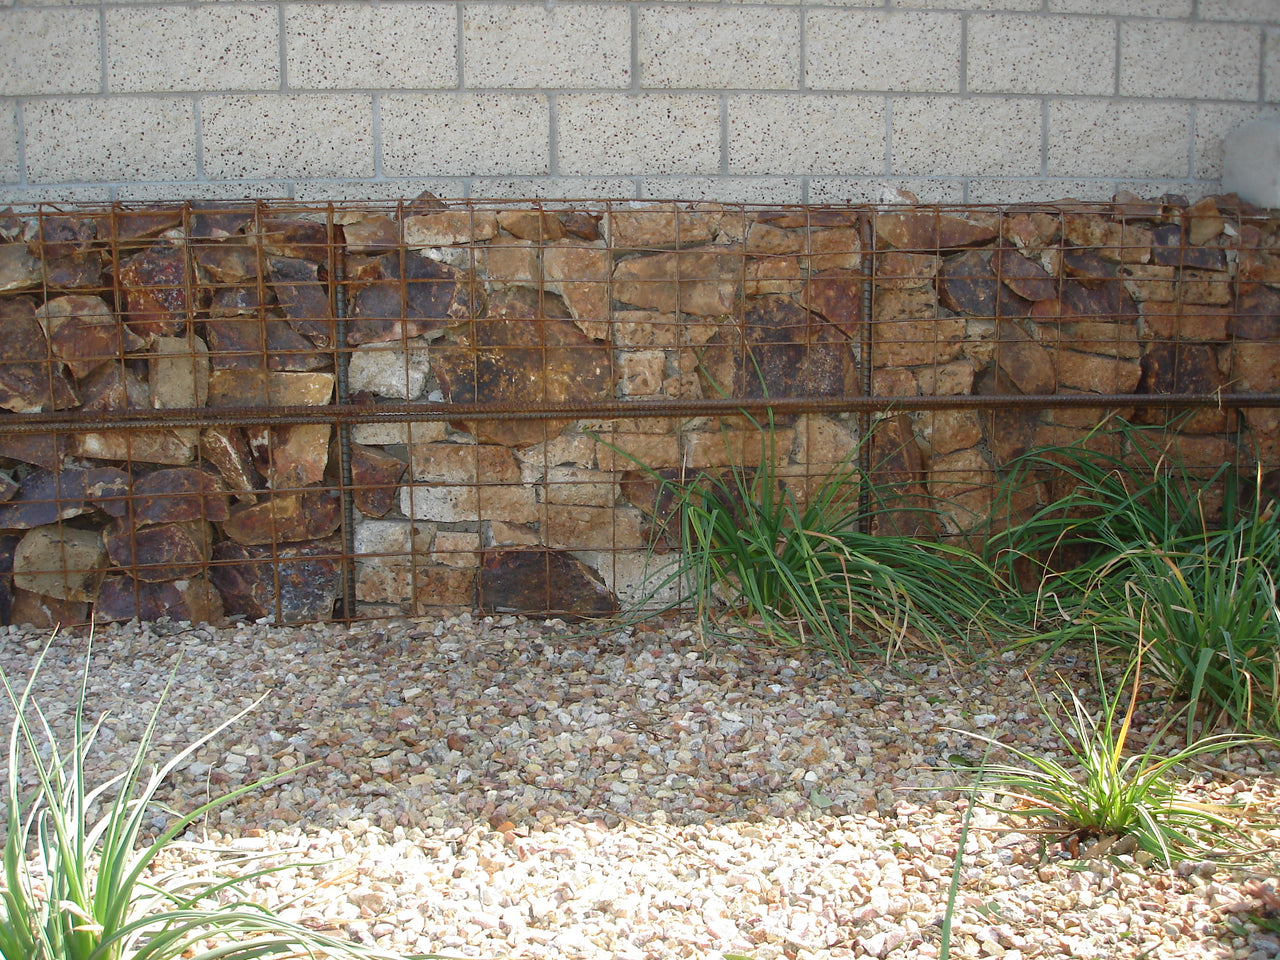 Gabion Stone Wall along with decorative stones with plants